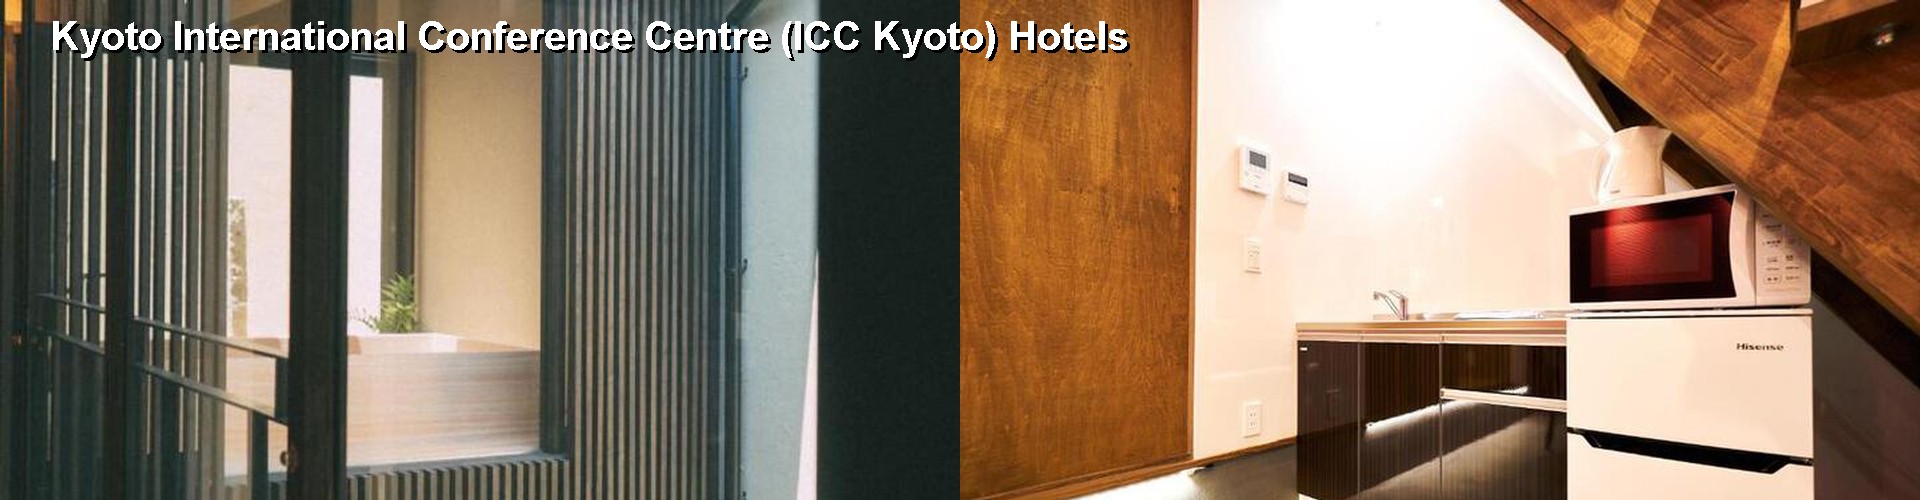 5 Best Hotels near Kyoto International Conference Centre (ICC Kyoto)